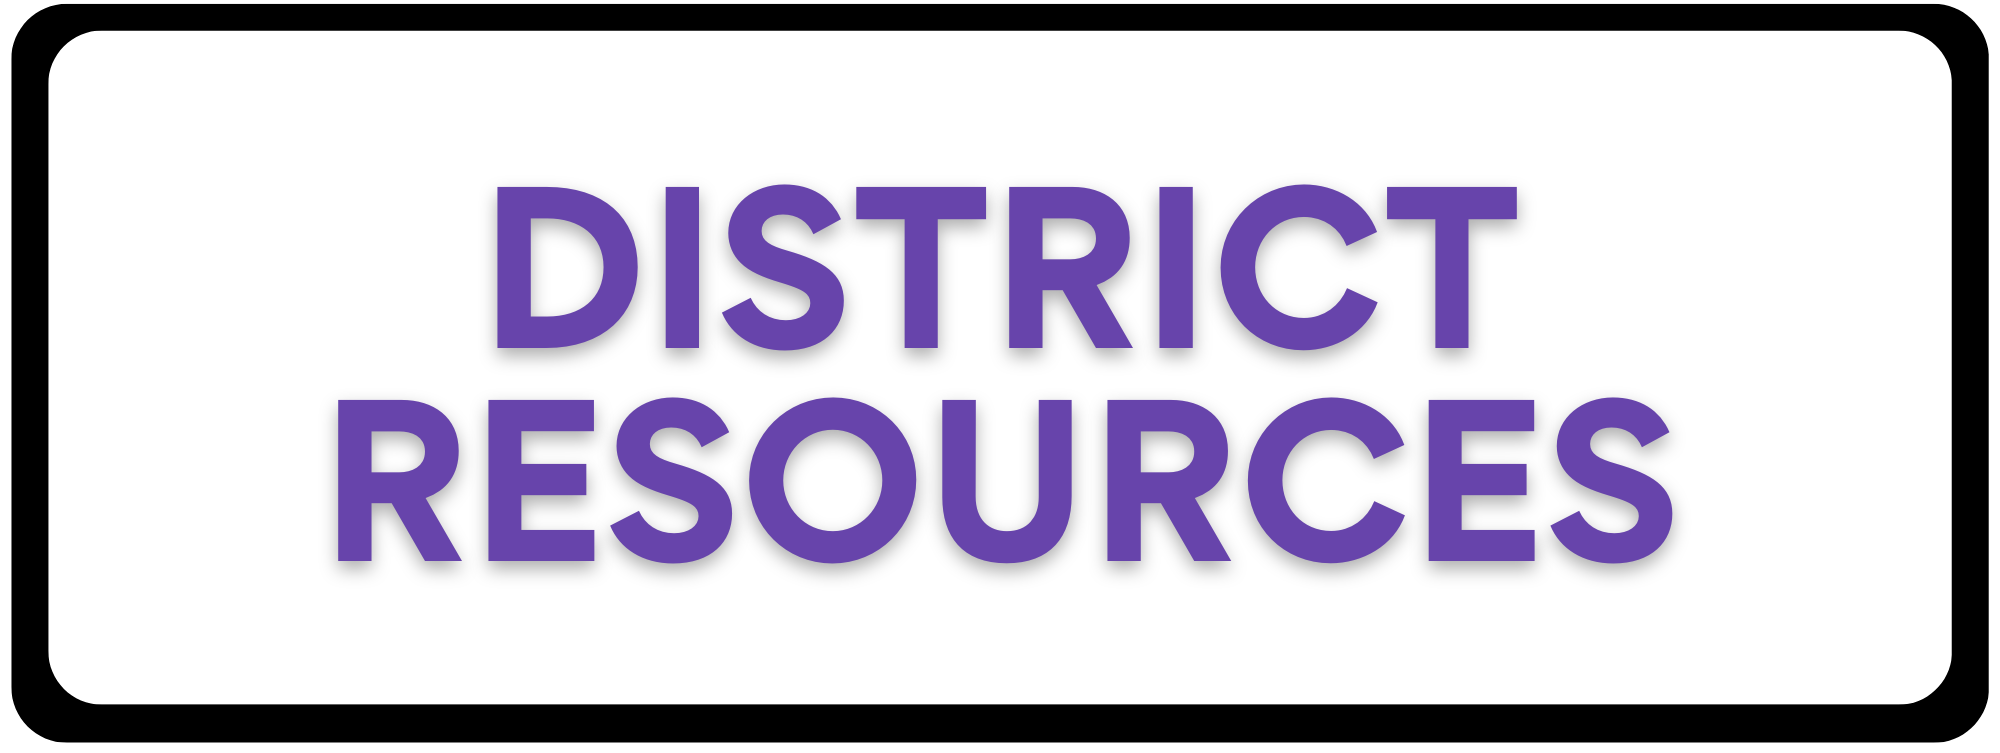 District resources